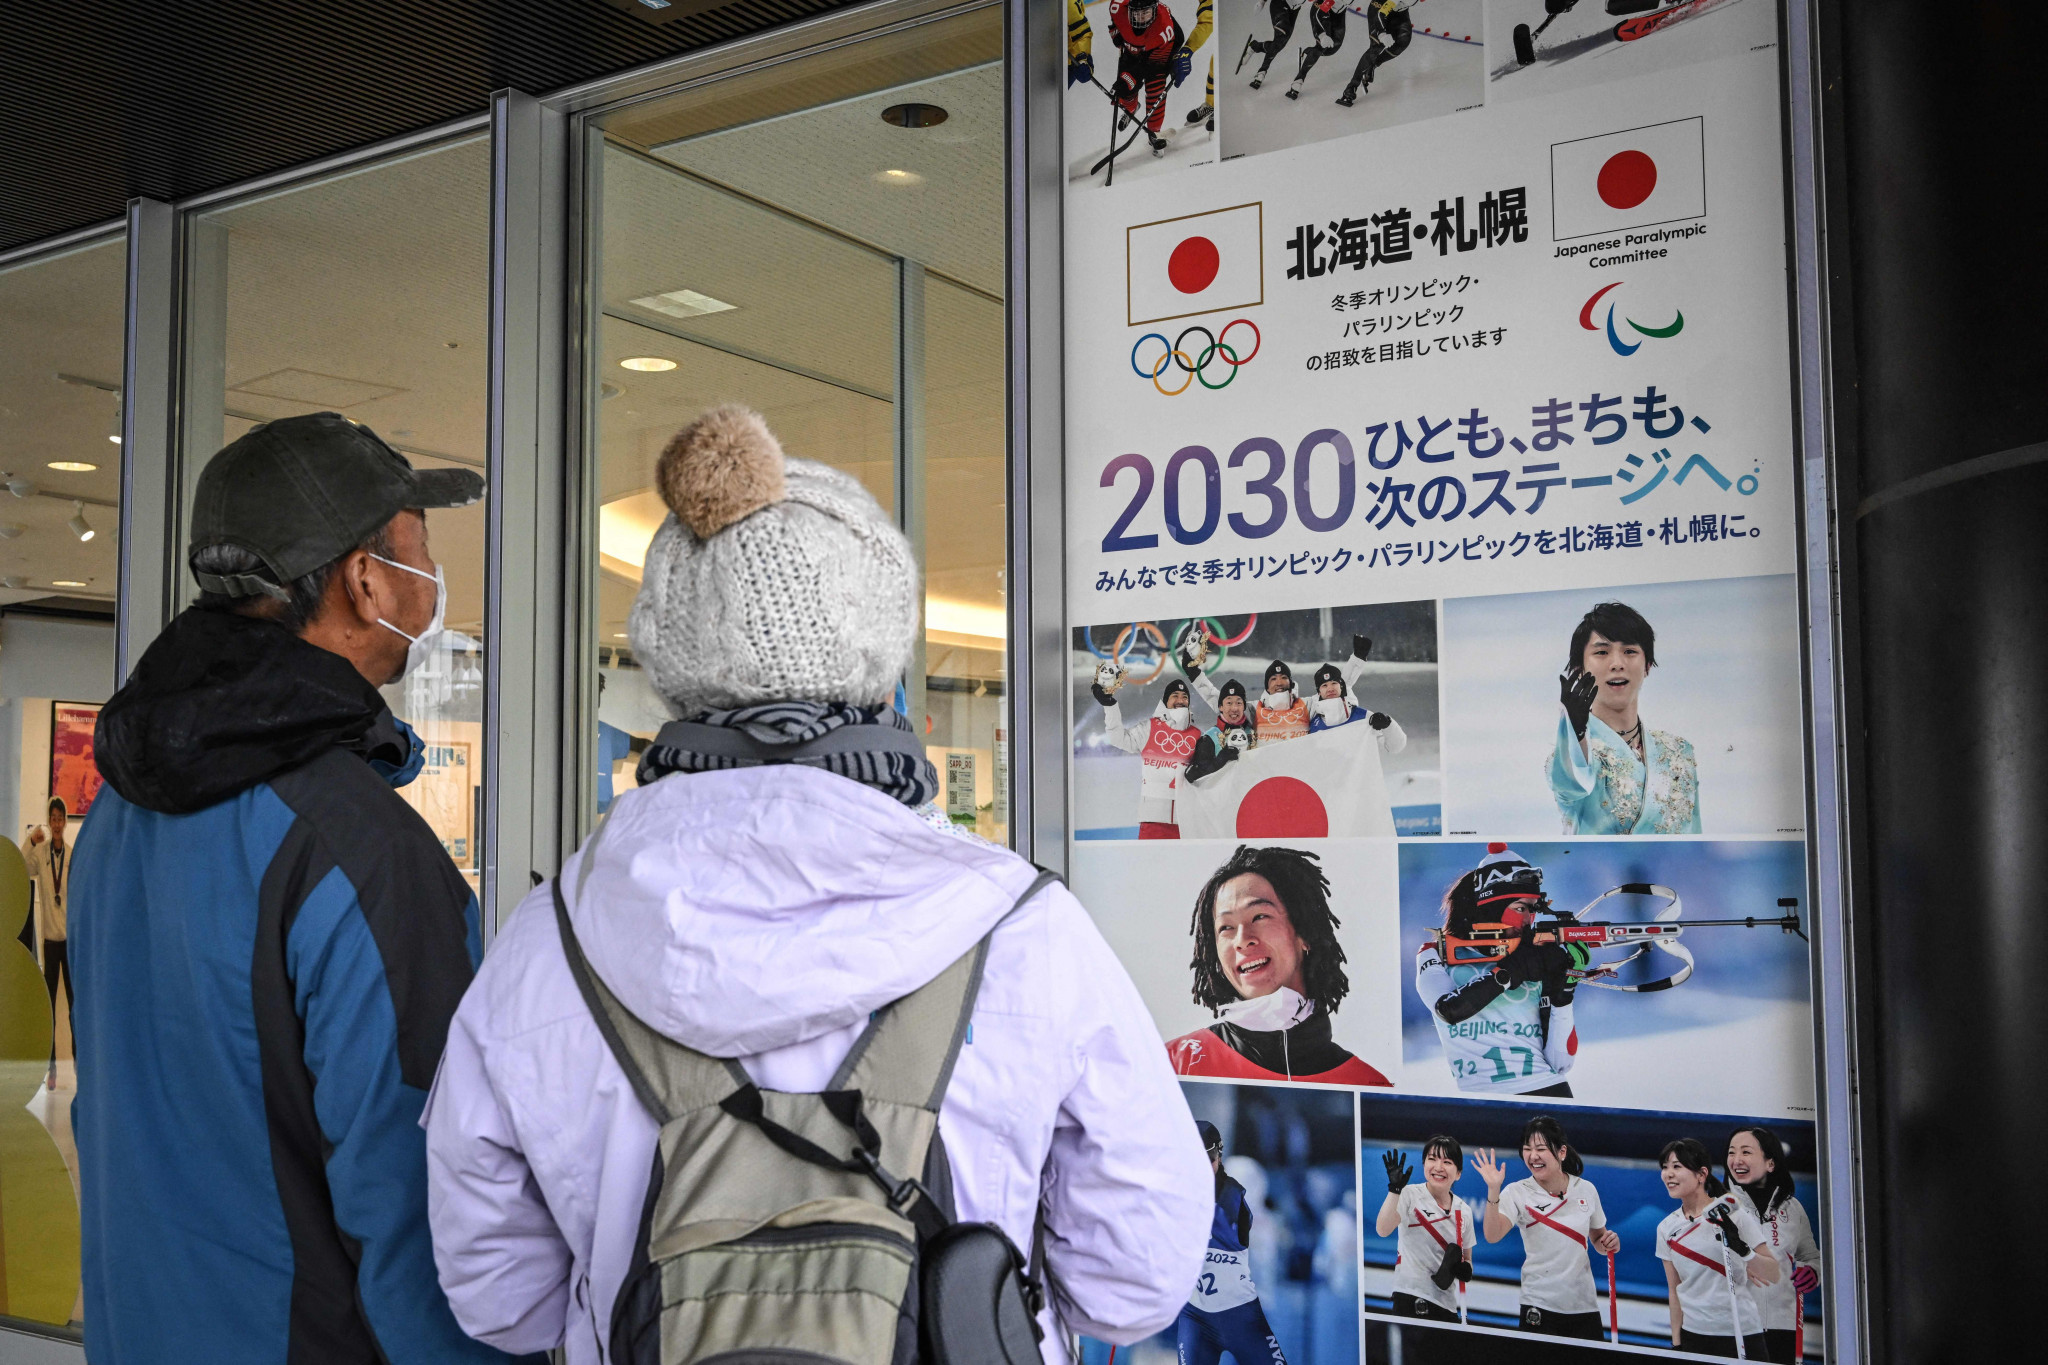 Sapporo has decided to walk away from bidding for the 2030 Winter Olympics and Paralympics ©Getty Images